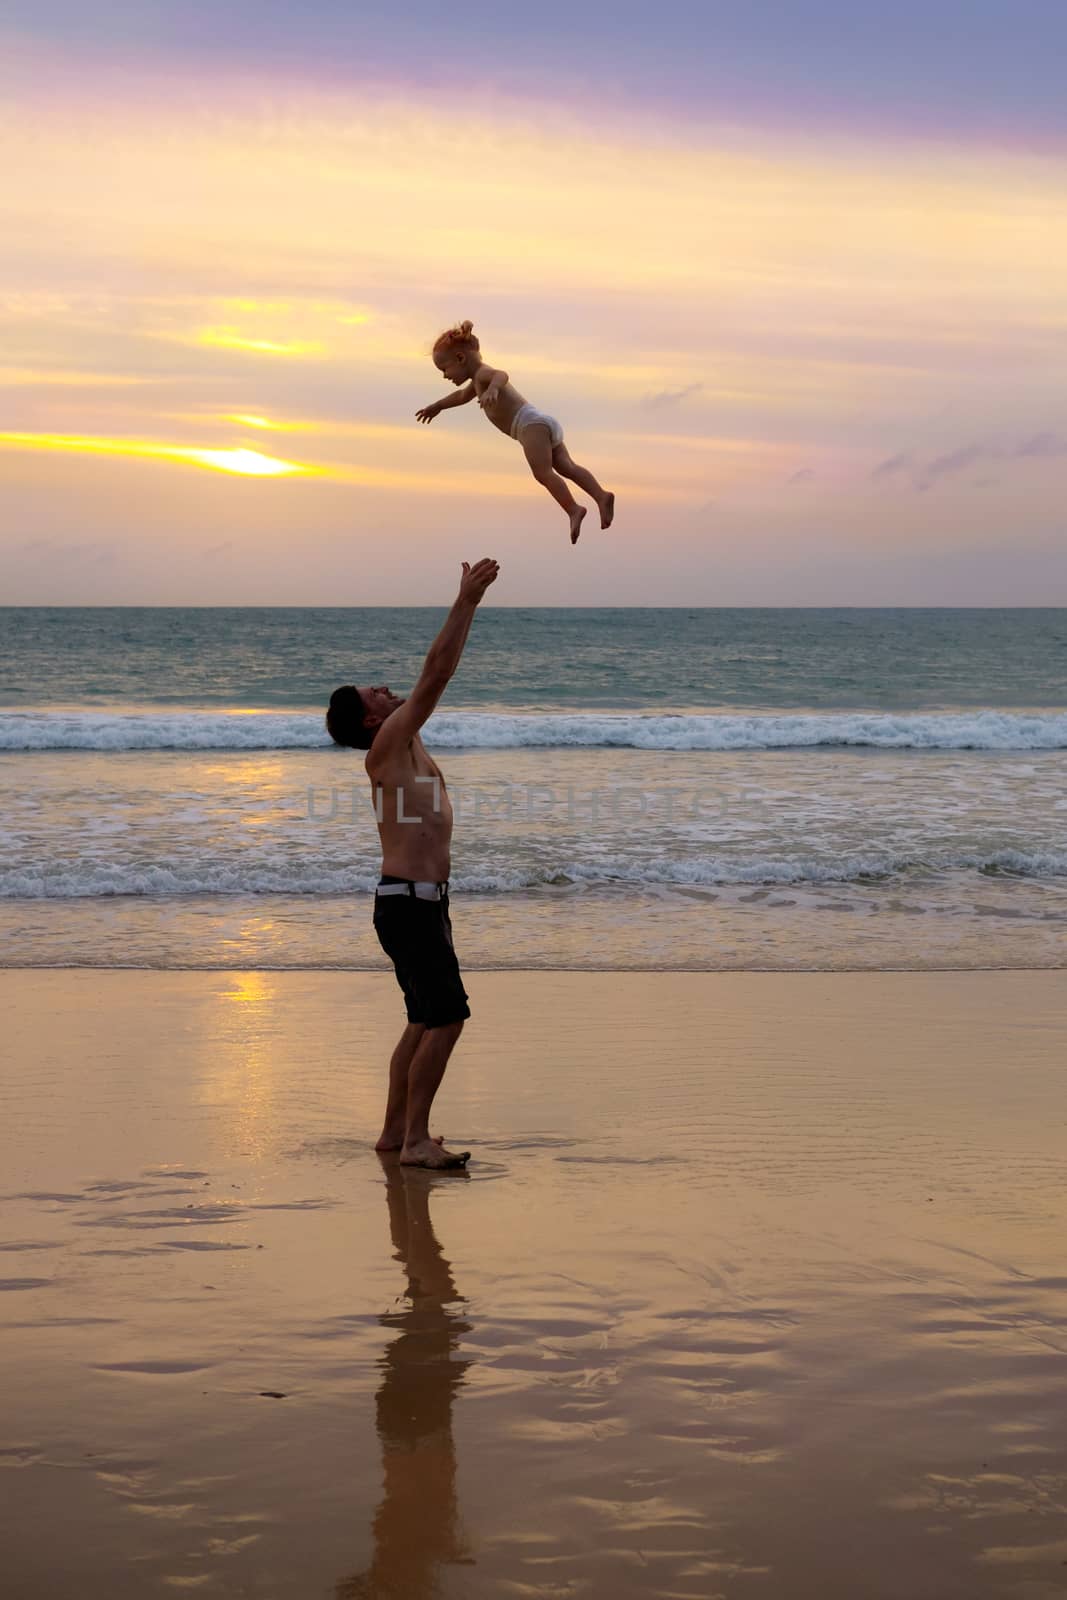 Father throws his daugter at the beach near the sea at the spect by rainfallsup